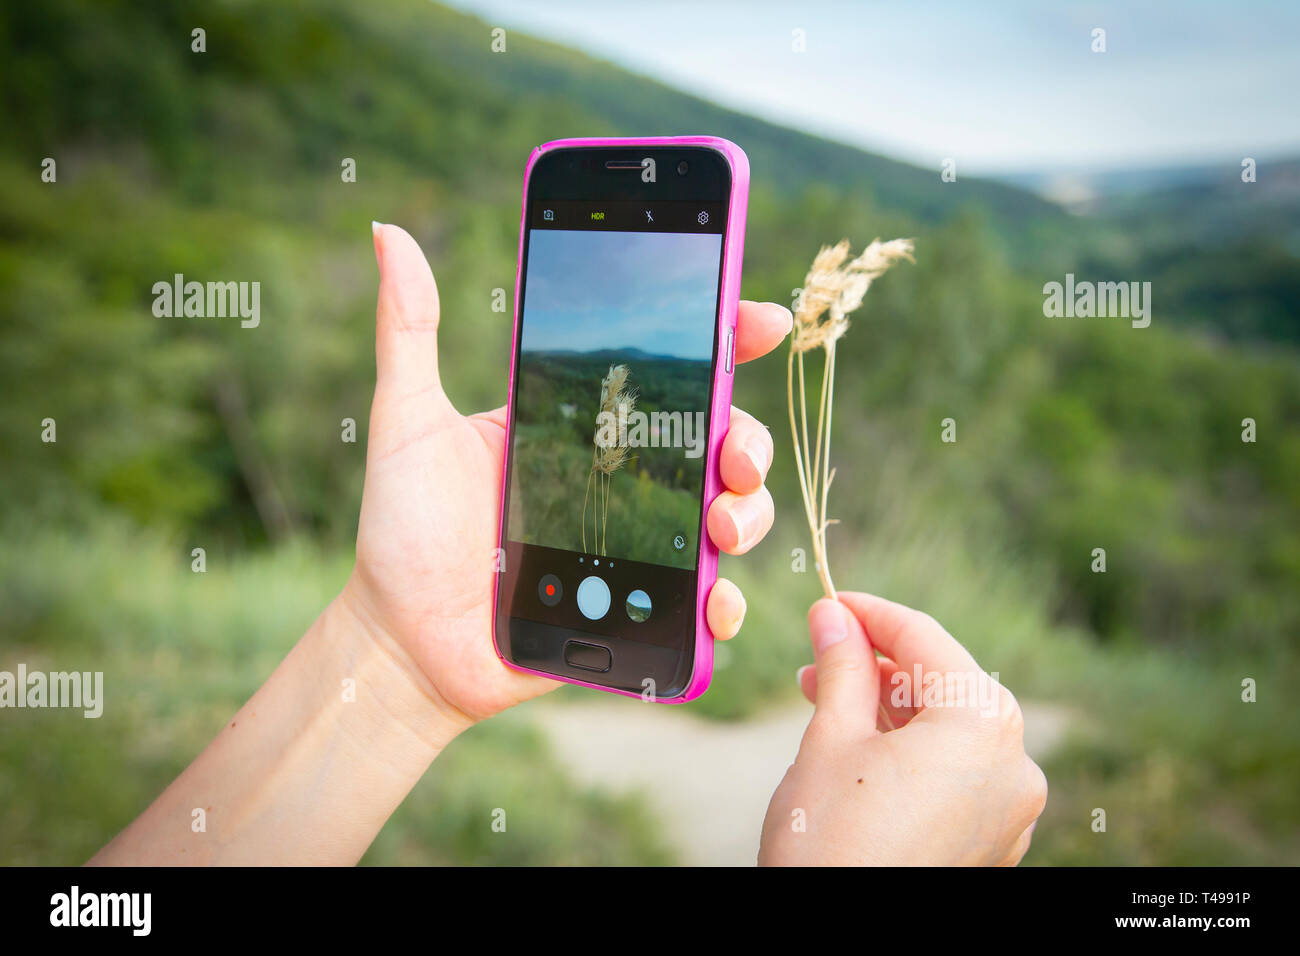 woman hand using phone to take a picture of grass stalk Stock Photo